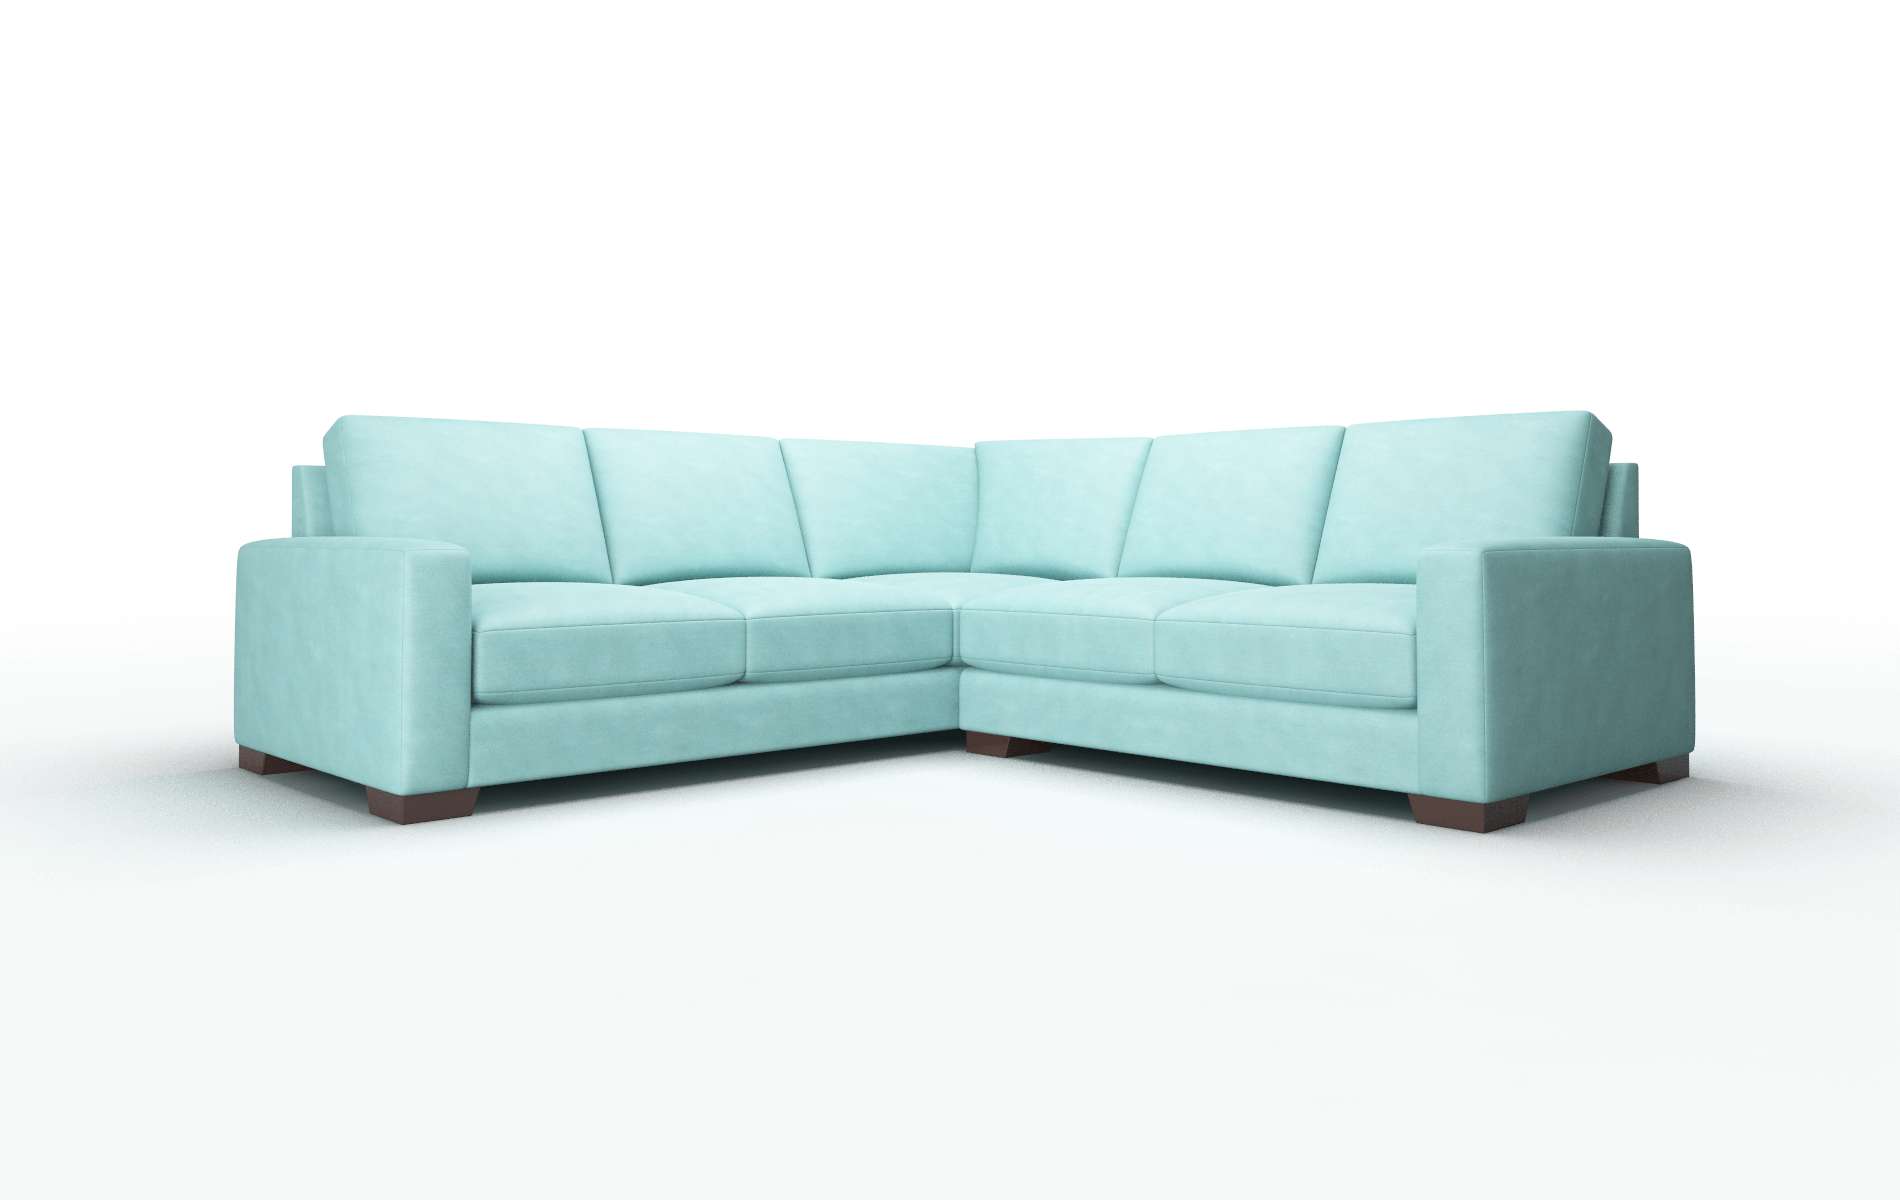 London Curious Turquoise Sectional espresso legs